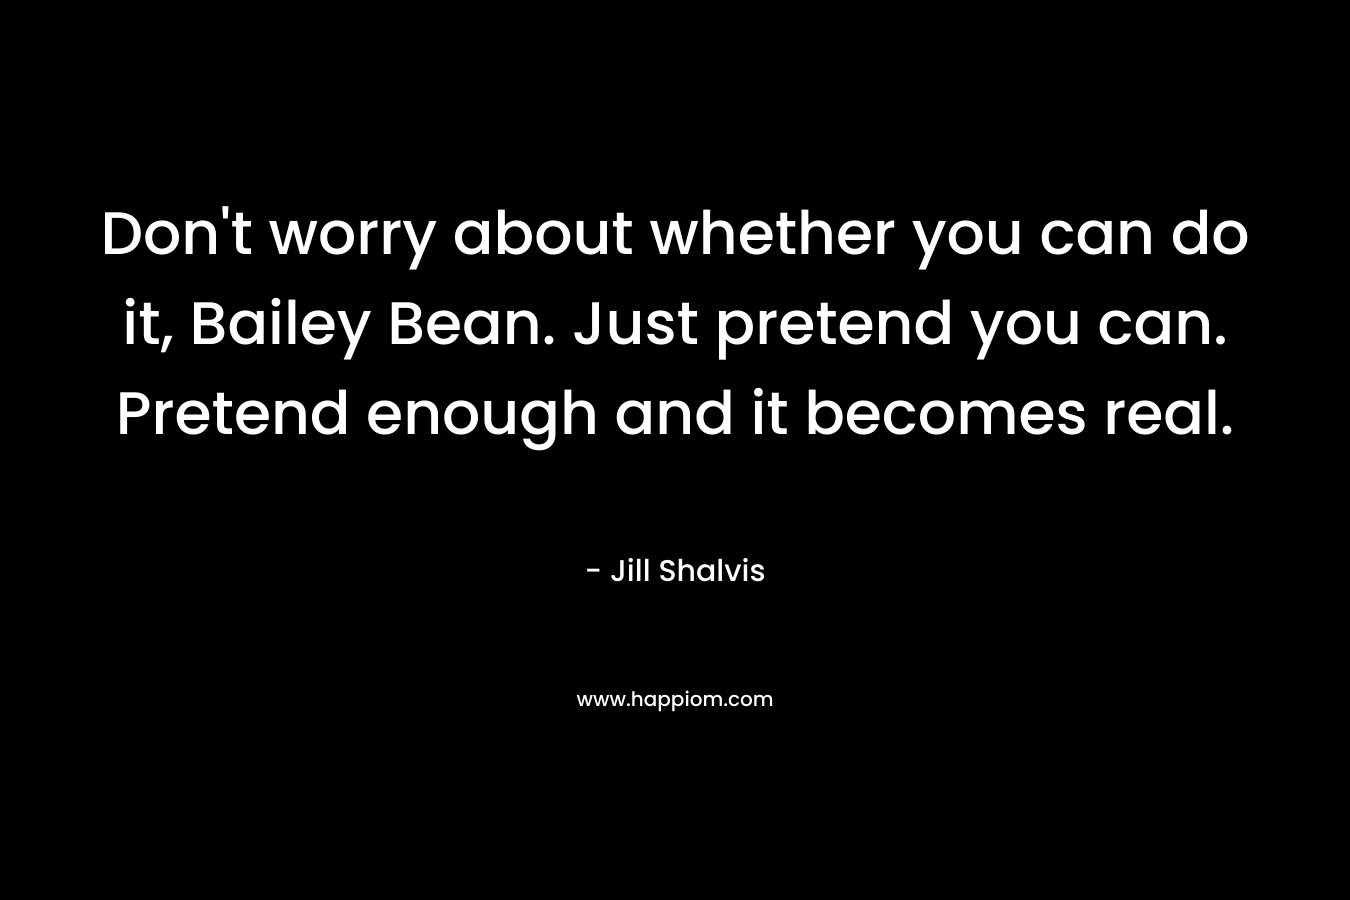 Don’t worry about whether you can do it, Bailey Bean. Just pretend you can. Pretend enough and it becomes real. – Jill Shalvis